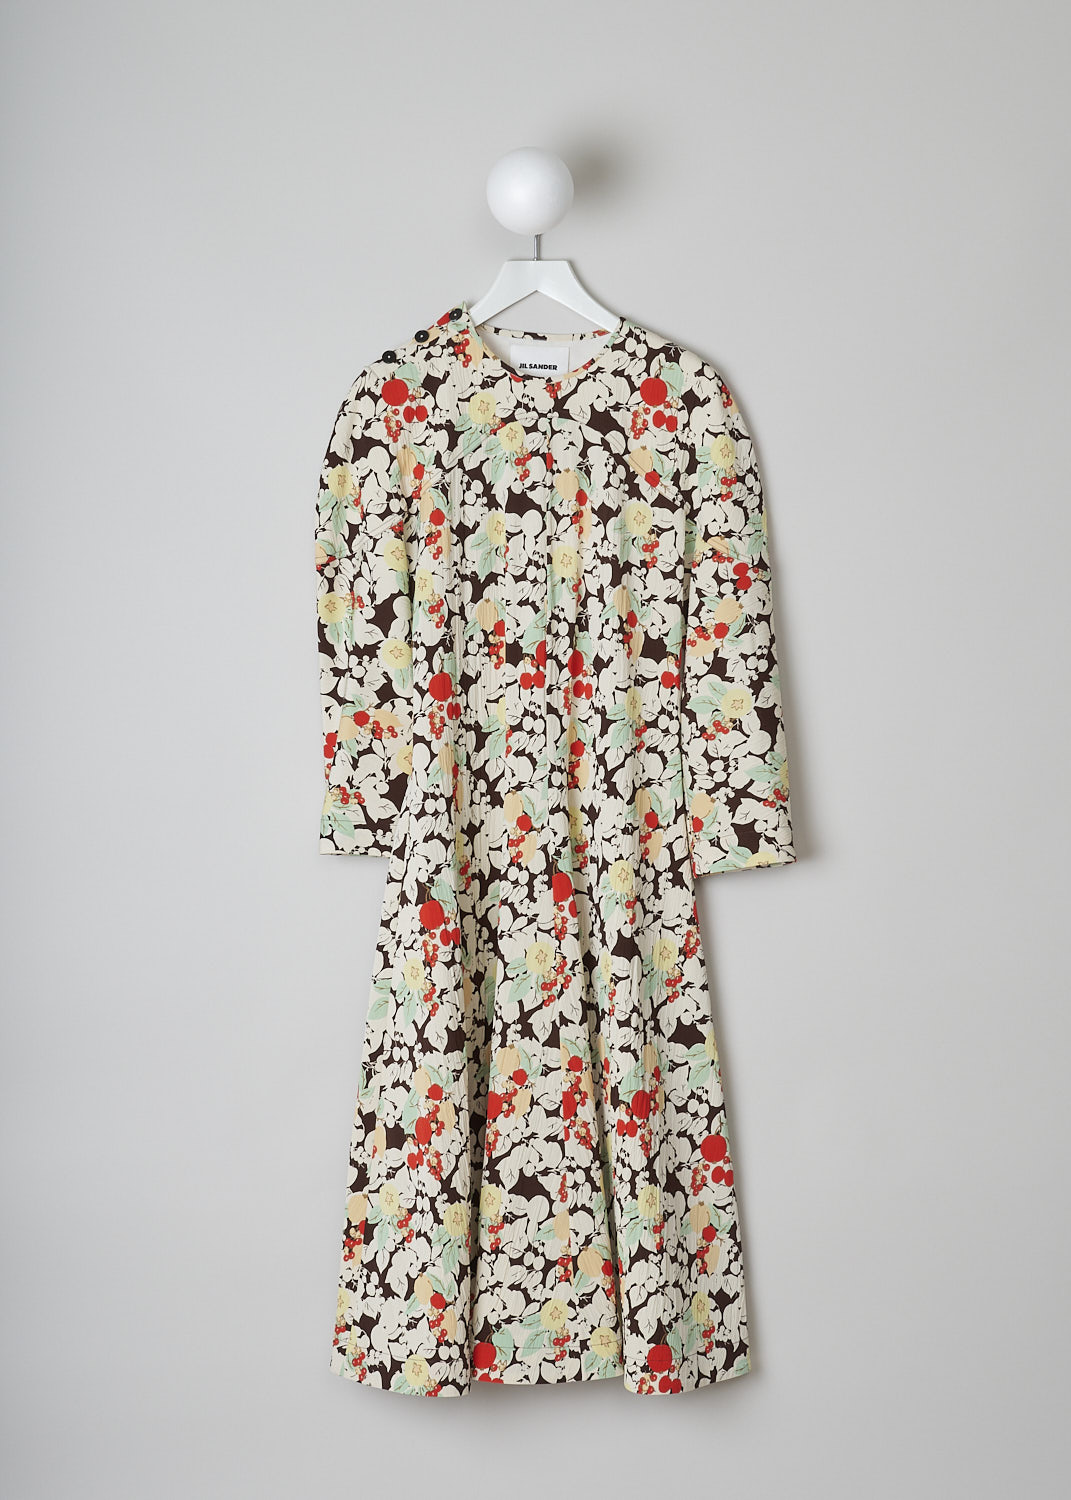 JIL SANDER, MULTICOLOR FRUIT PRINT MIDI DRESS, J01CT0010_J65010_972, Print, Red, Green, Front, This midi dress has a multicolor fruit print. The bodice has a round neckline, three functioning buttons on the right shoulders and long sleeves. A concealed side zip functions as the closure option. The skirt flares out and has a single slanted pocket concealed in the seam.
